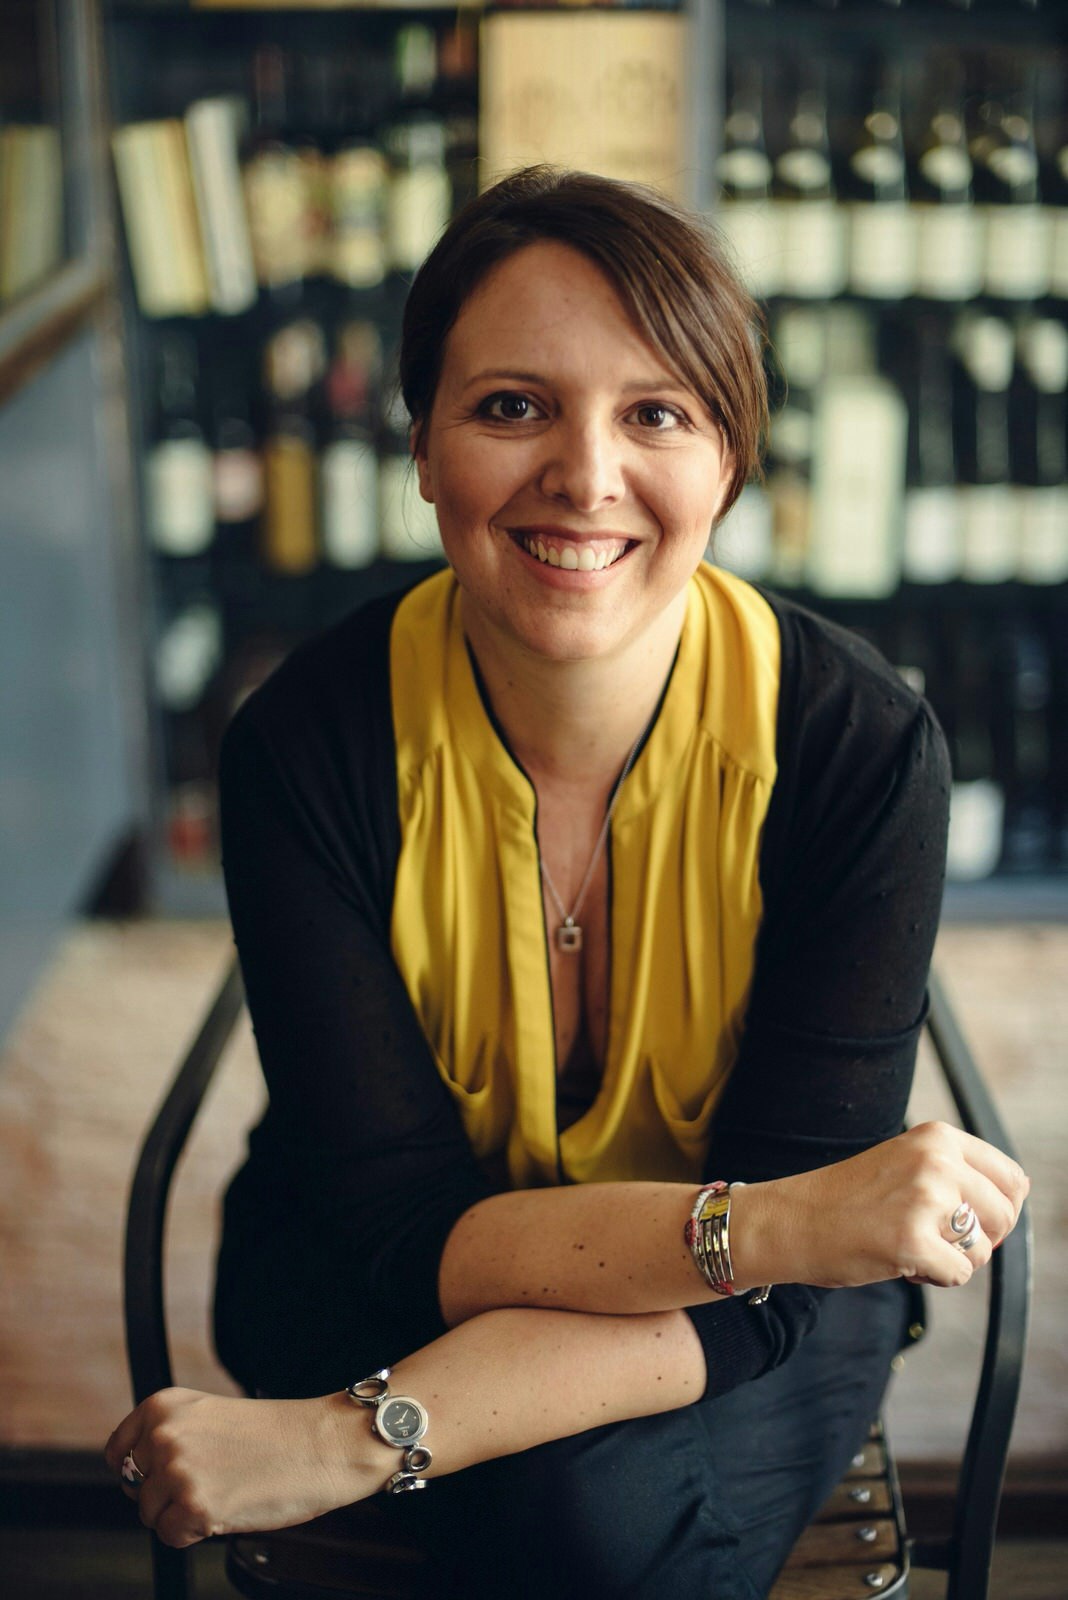 A woman smiling into the camera wearing a yellow scarf and black top. There is wine stacked from floor to ceiling in the background.